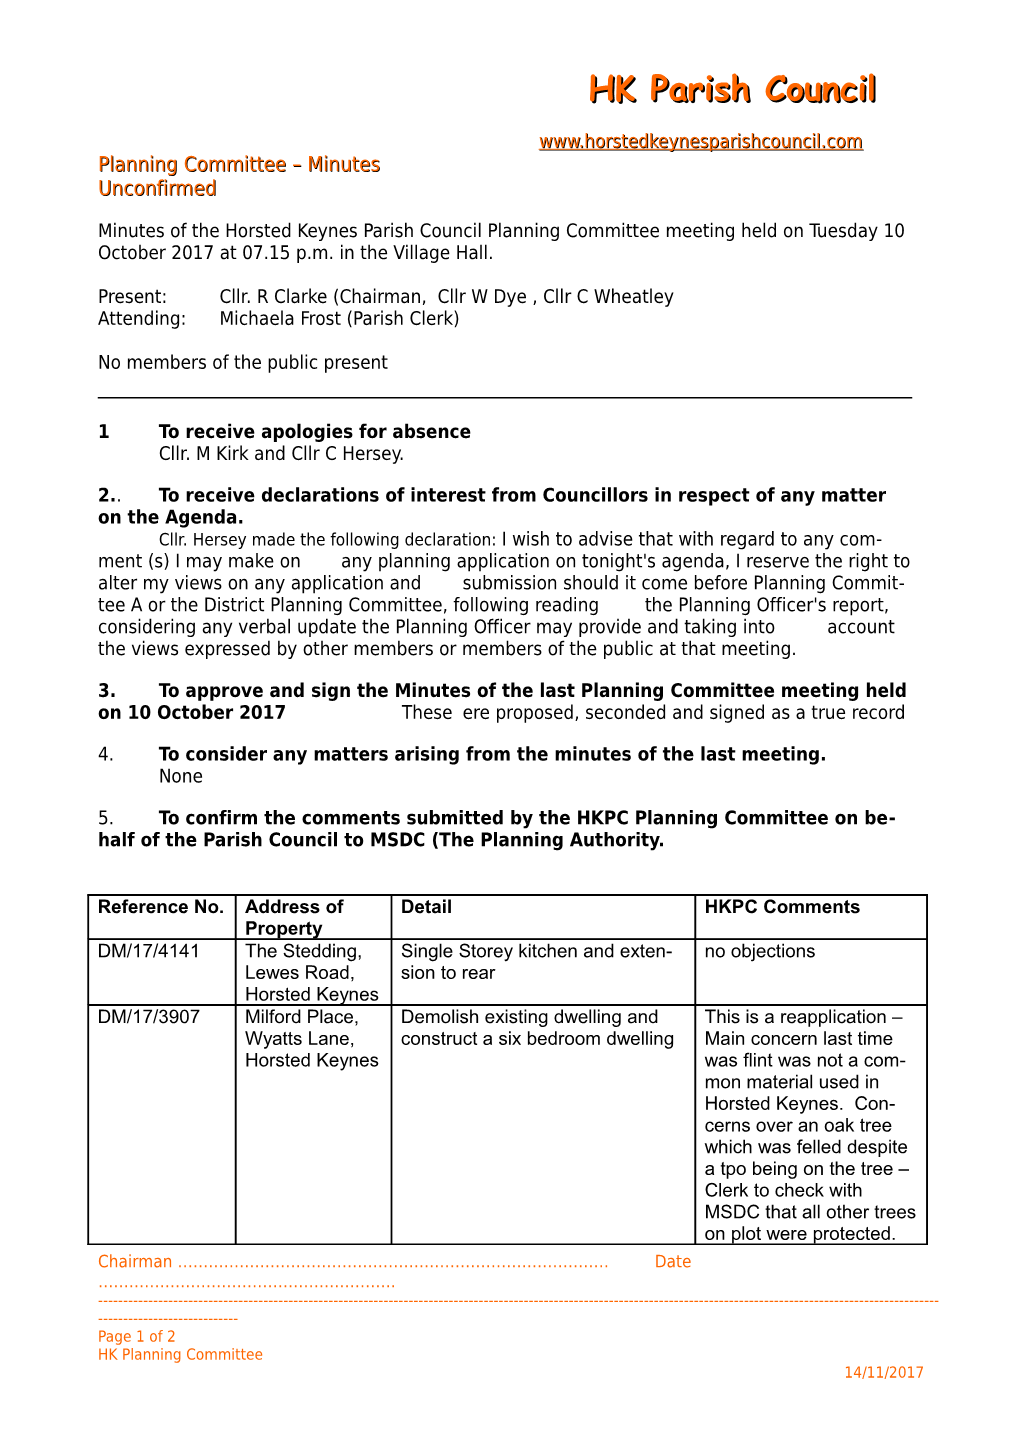 Minutes of the Horsted Keynes Parish Council Planning Committee Meeting Held on Tuesday